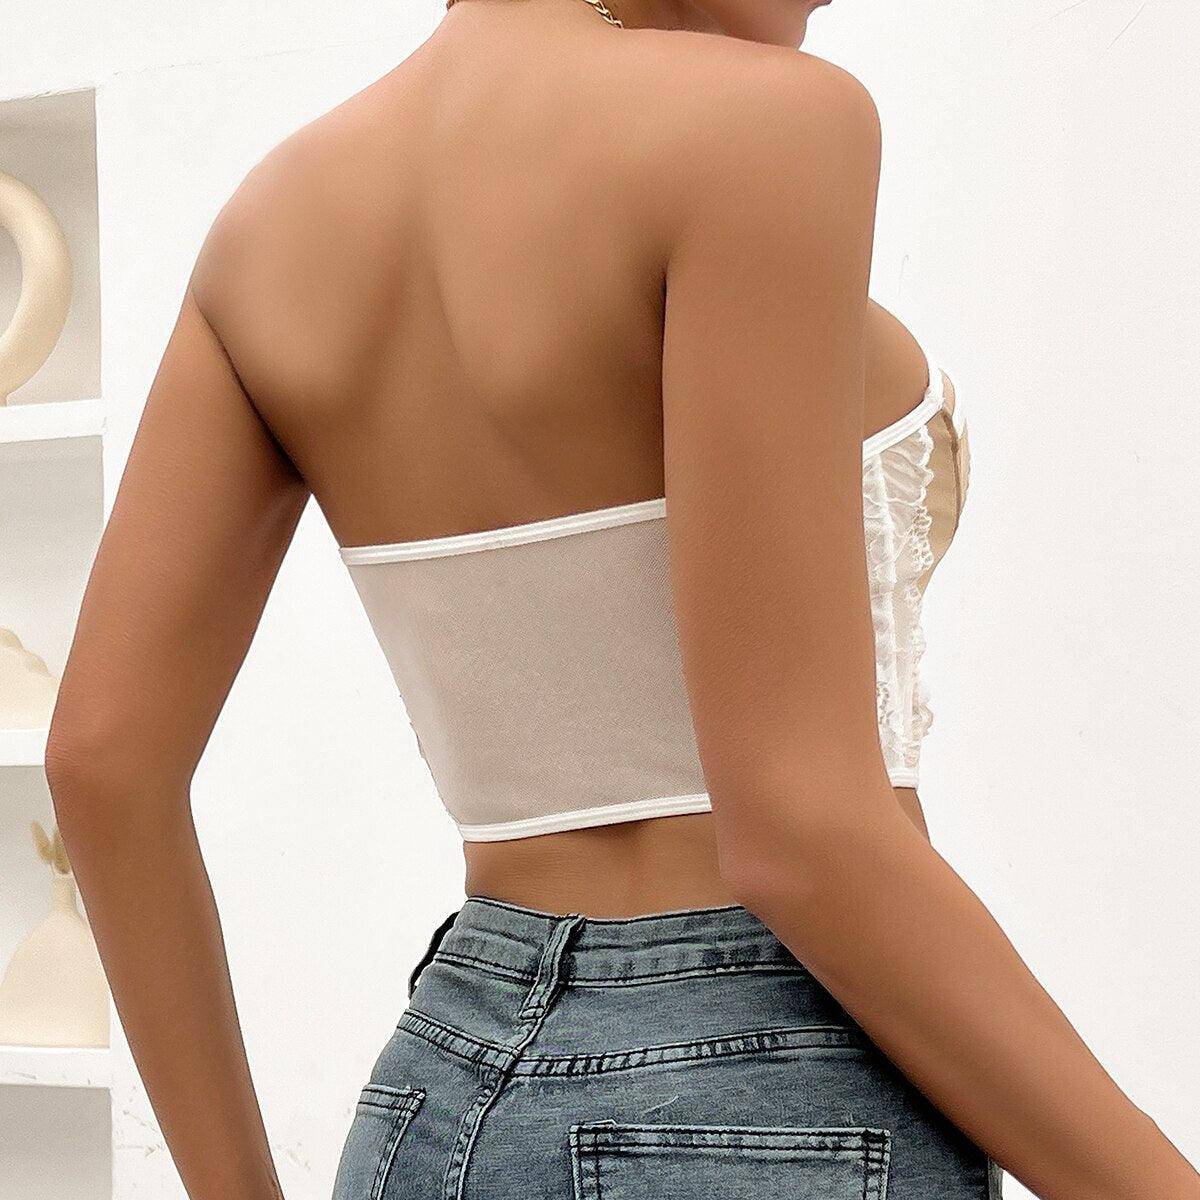 Molly Sweetheart Bustier Cropped Top - Hot fashionista